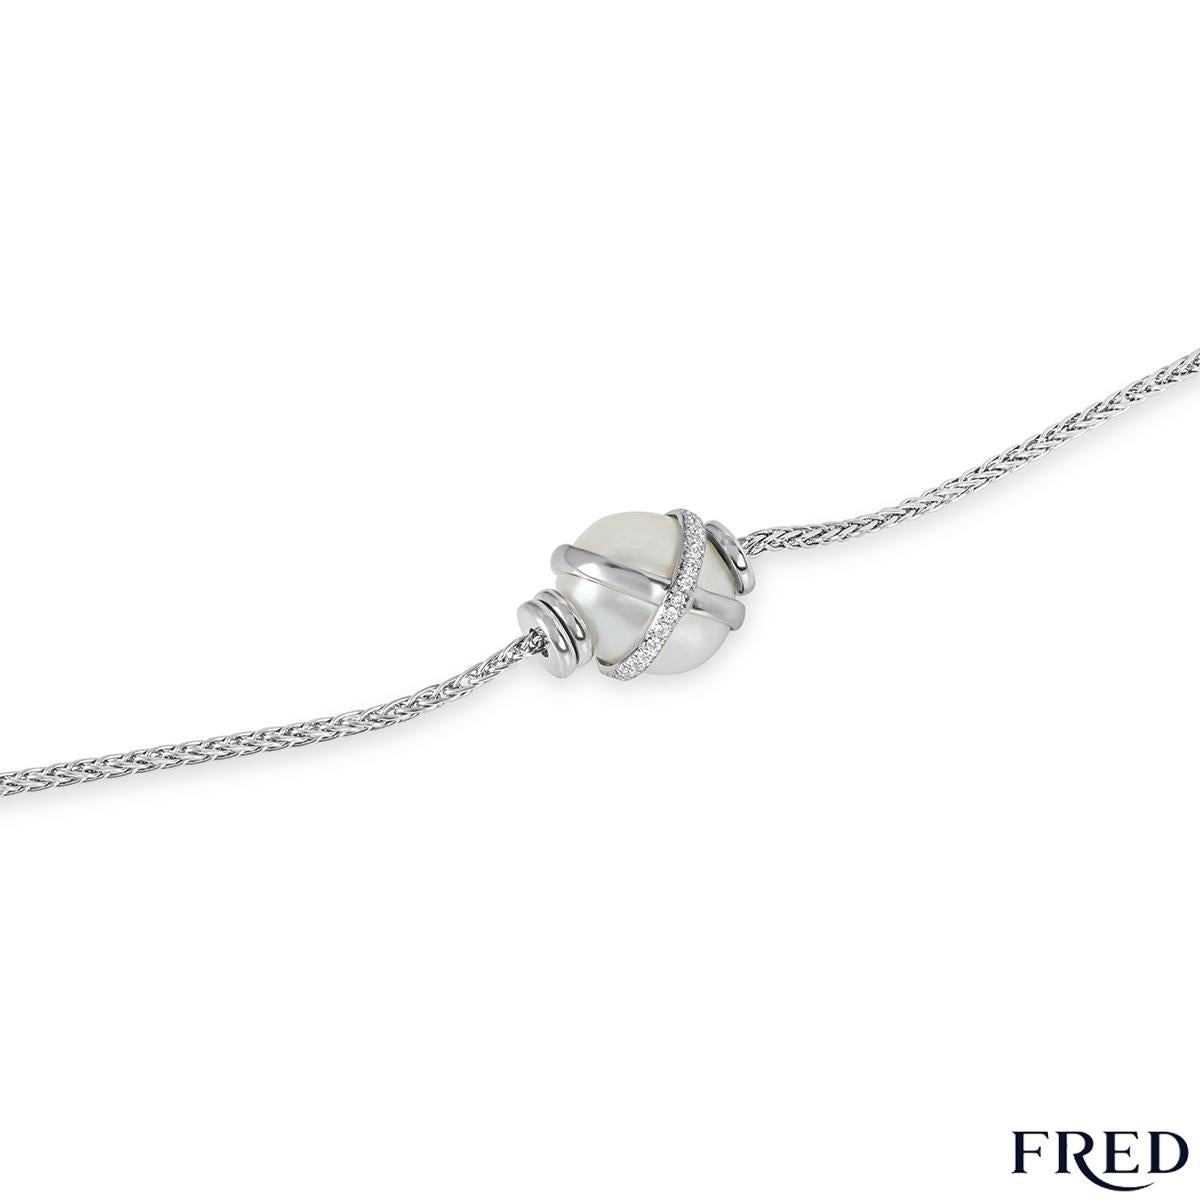 A beautiful diamond and pearl bracelet in platinum from the Baie Des Anges collection by Fred. The bracelet is set to the centre with a 10 - 10.5mm white freshwater pearl with a platinum cross over design through the middle. This is half pave set